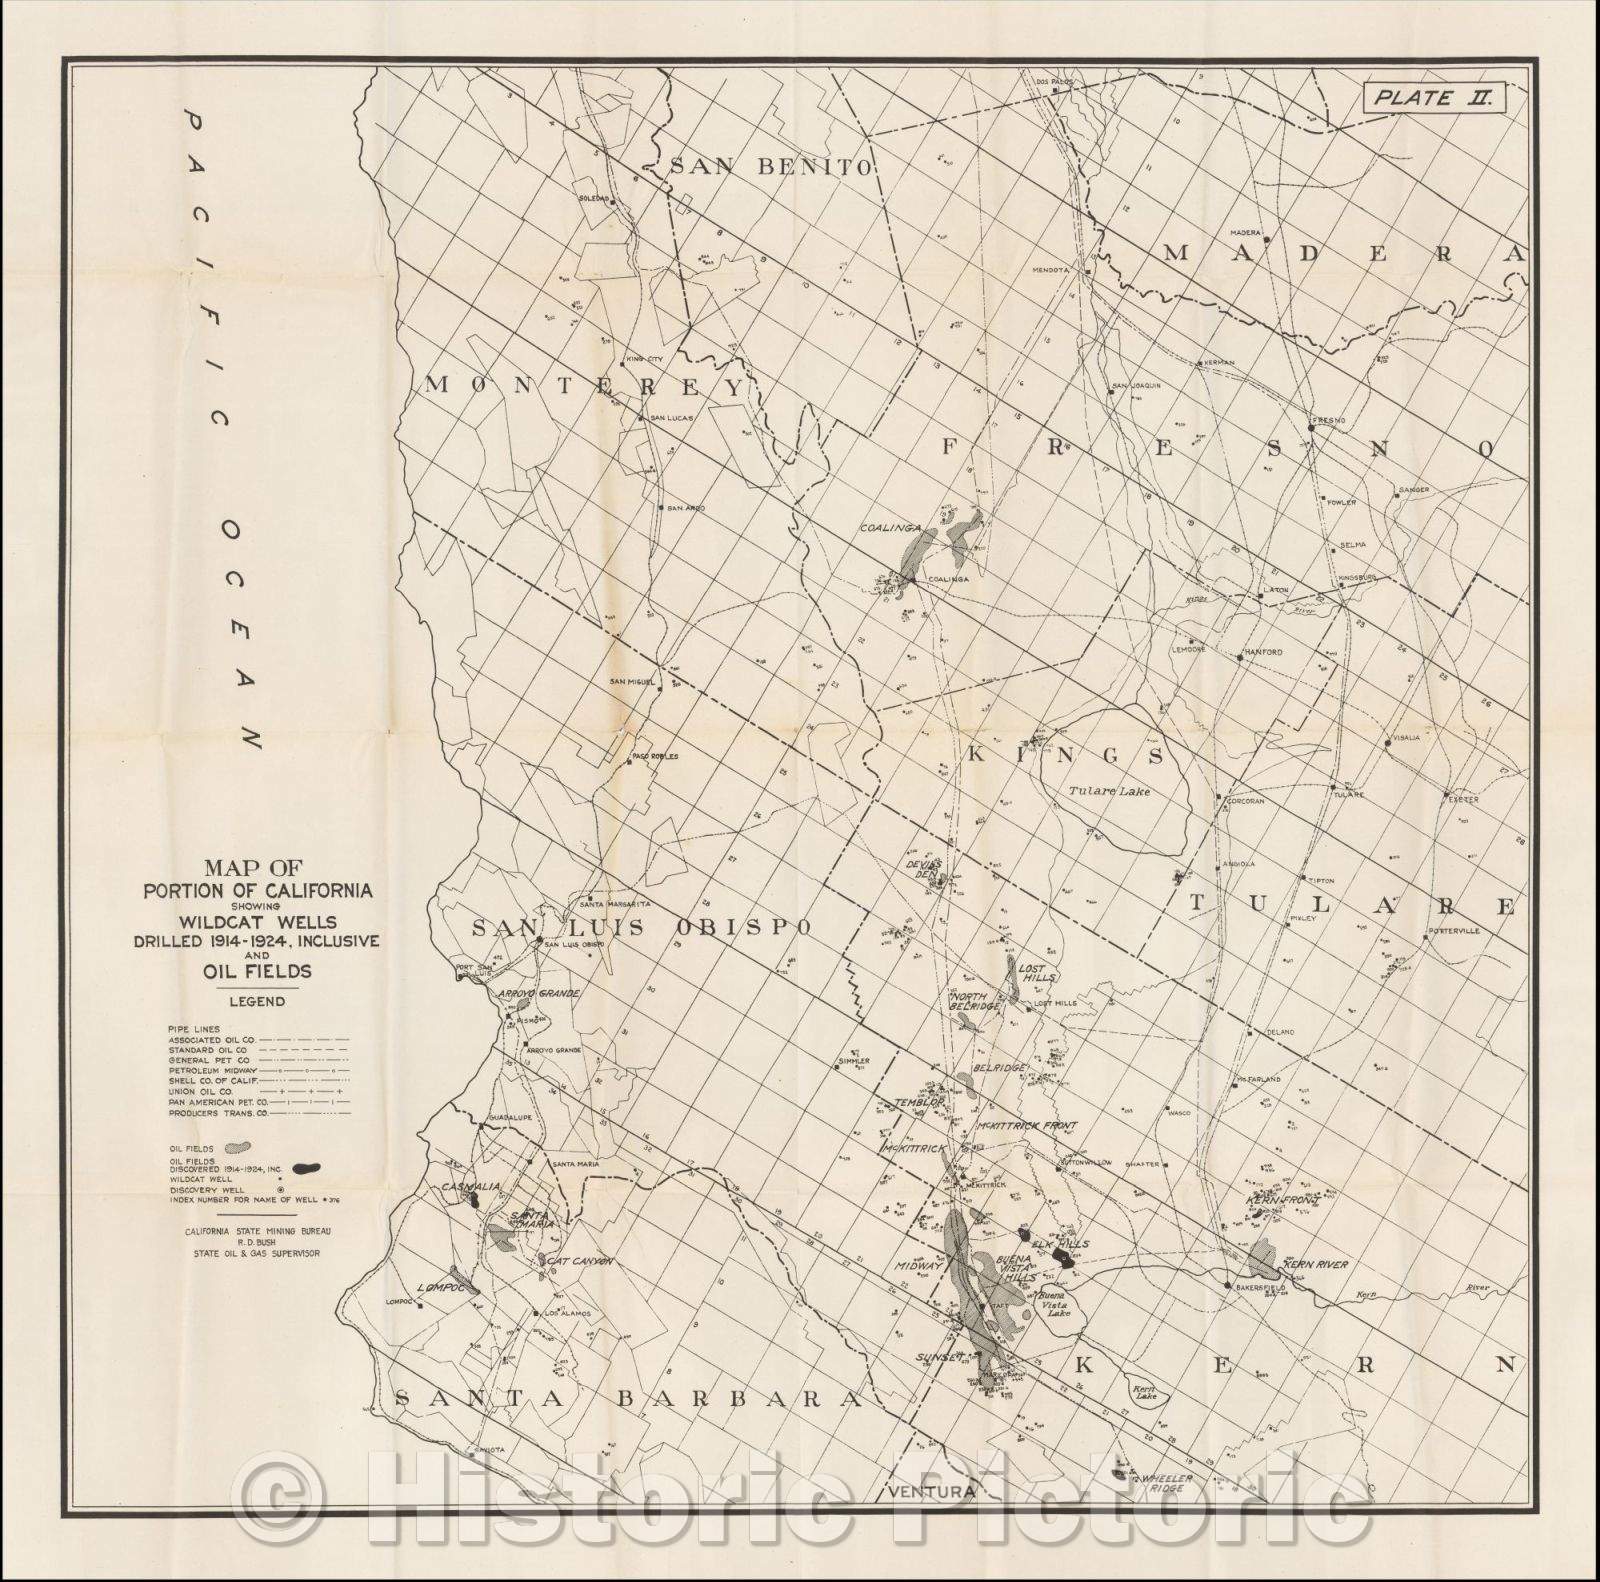 Historic Map - Map of Portion of California Showing Wildcat Wells Drilled 1914-1924, inclusive and Oil Fields, 1925, California State Mining Bureau - Vintage Wall Art